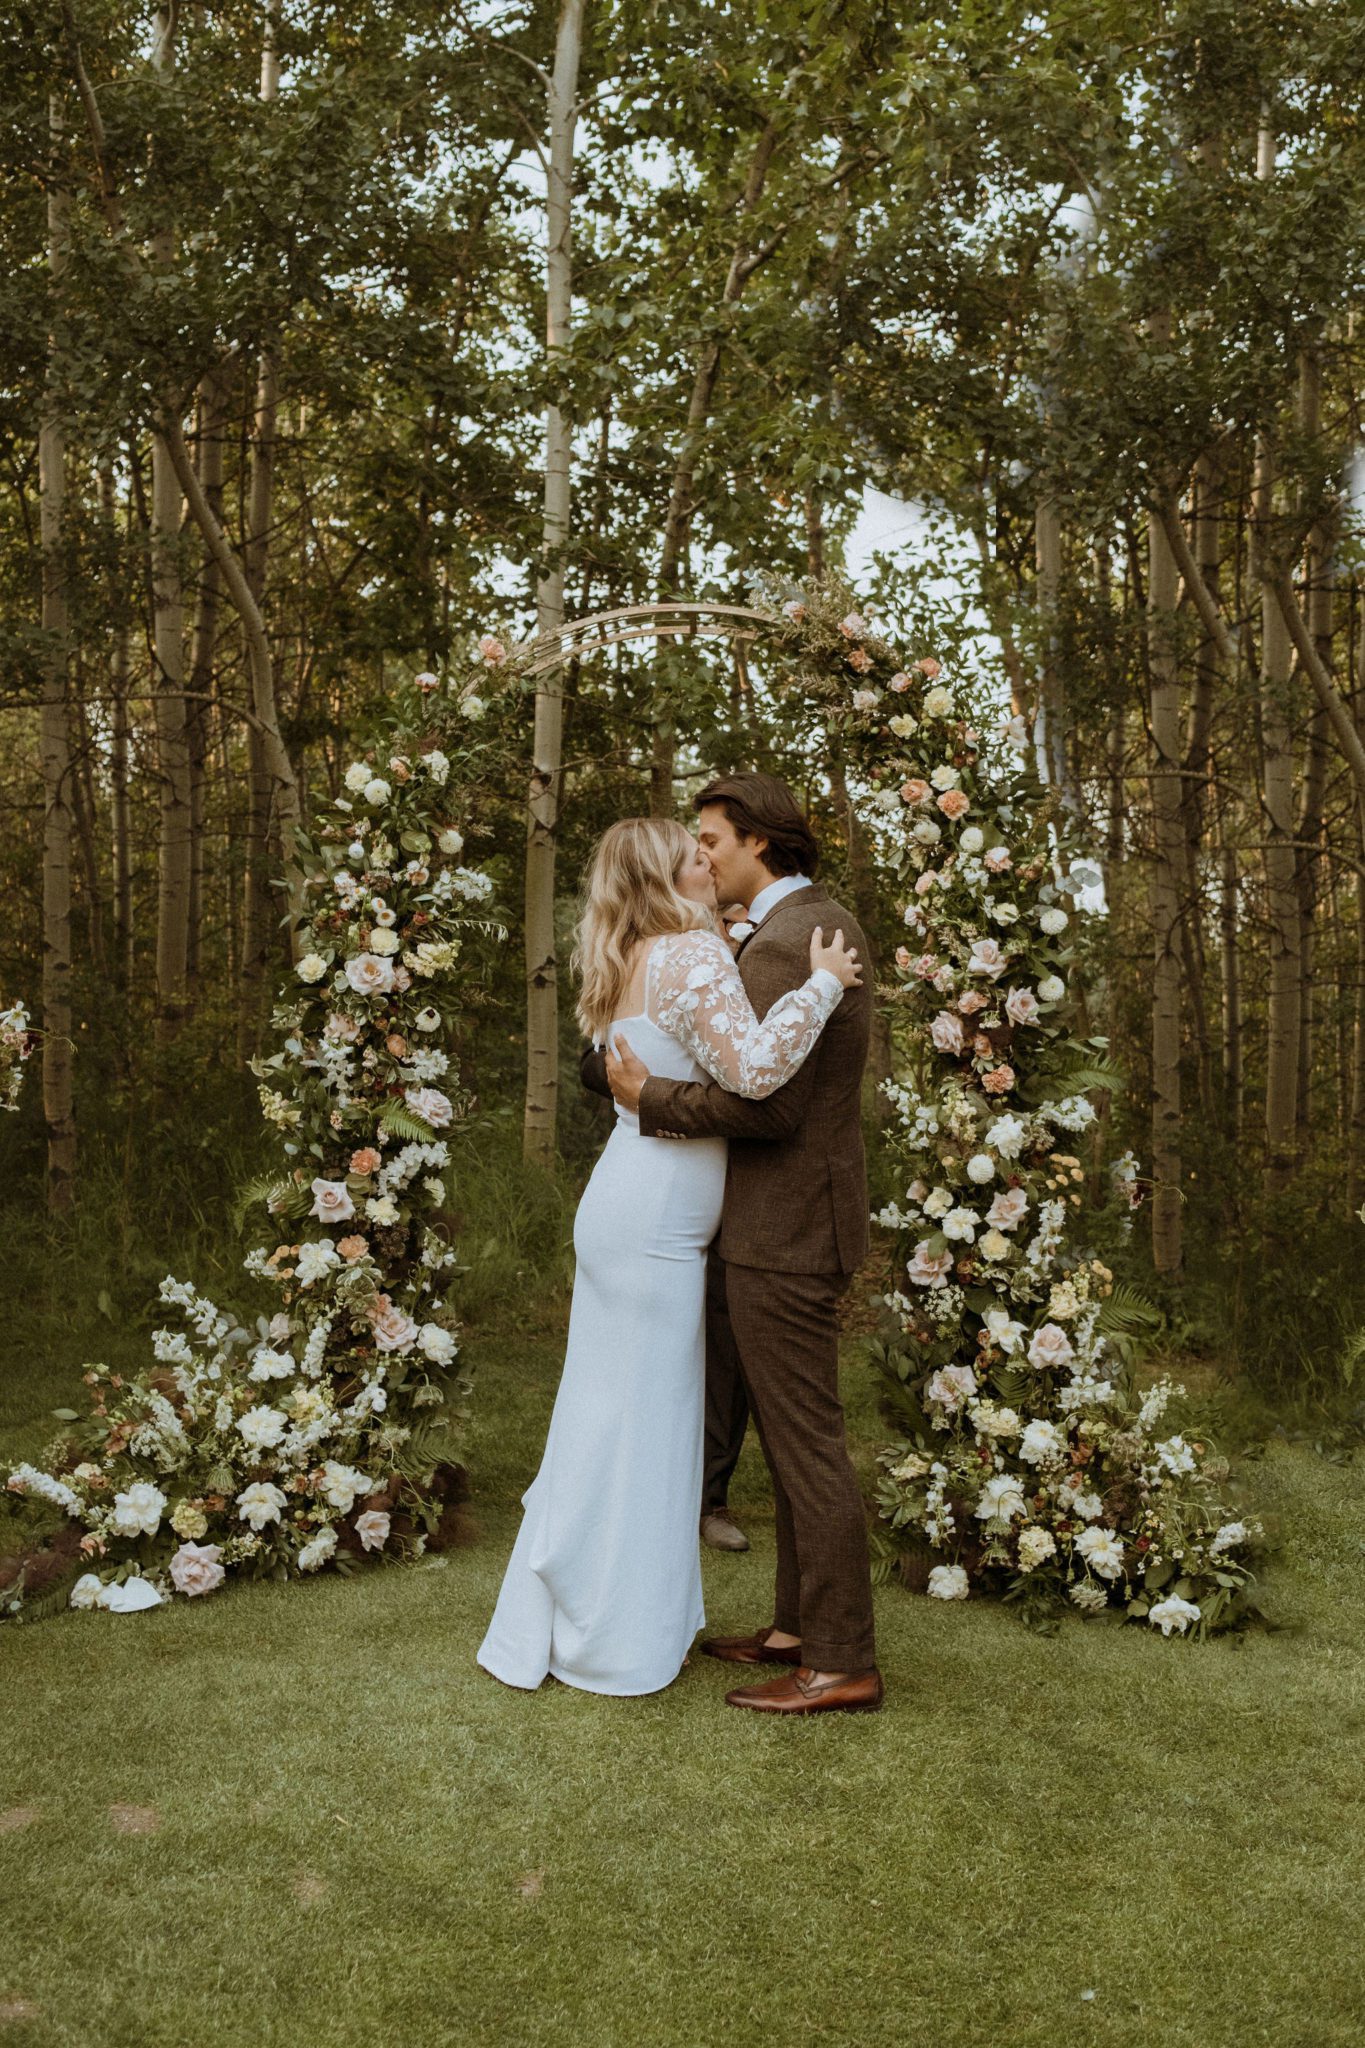 Bride and groom pose under dusty pink and green floral arch at summer wedding